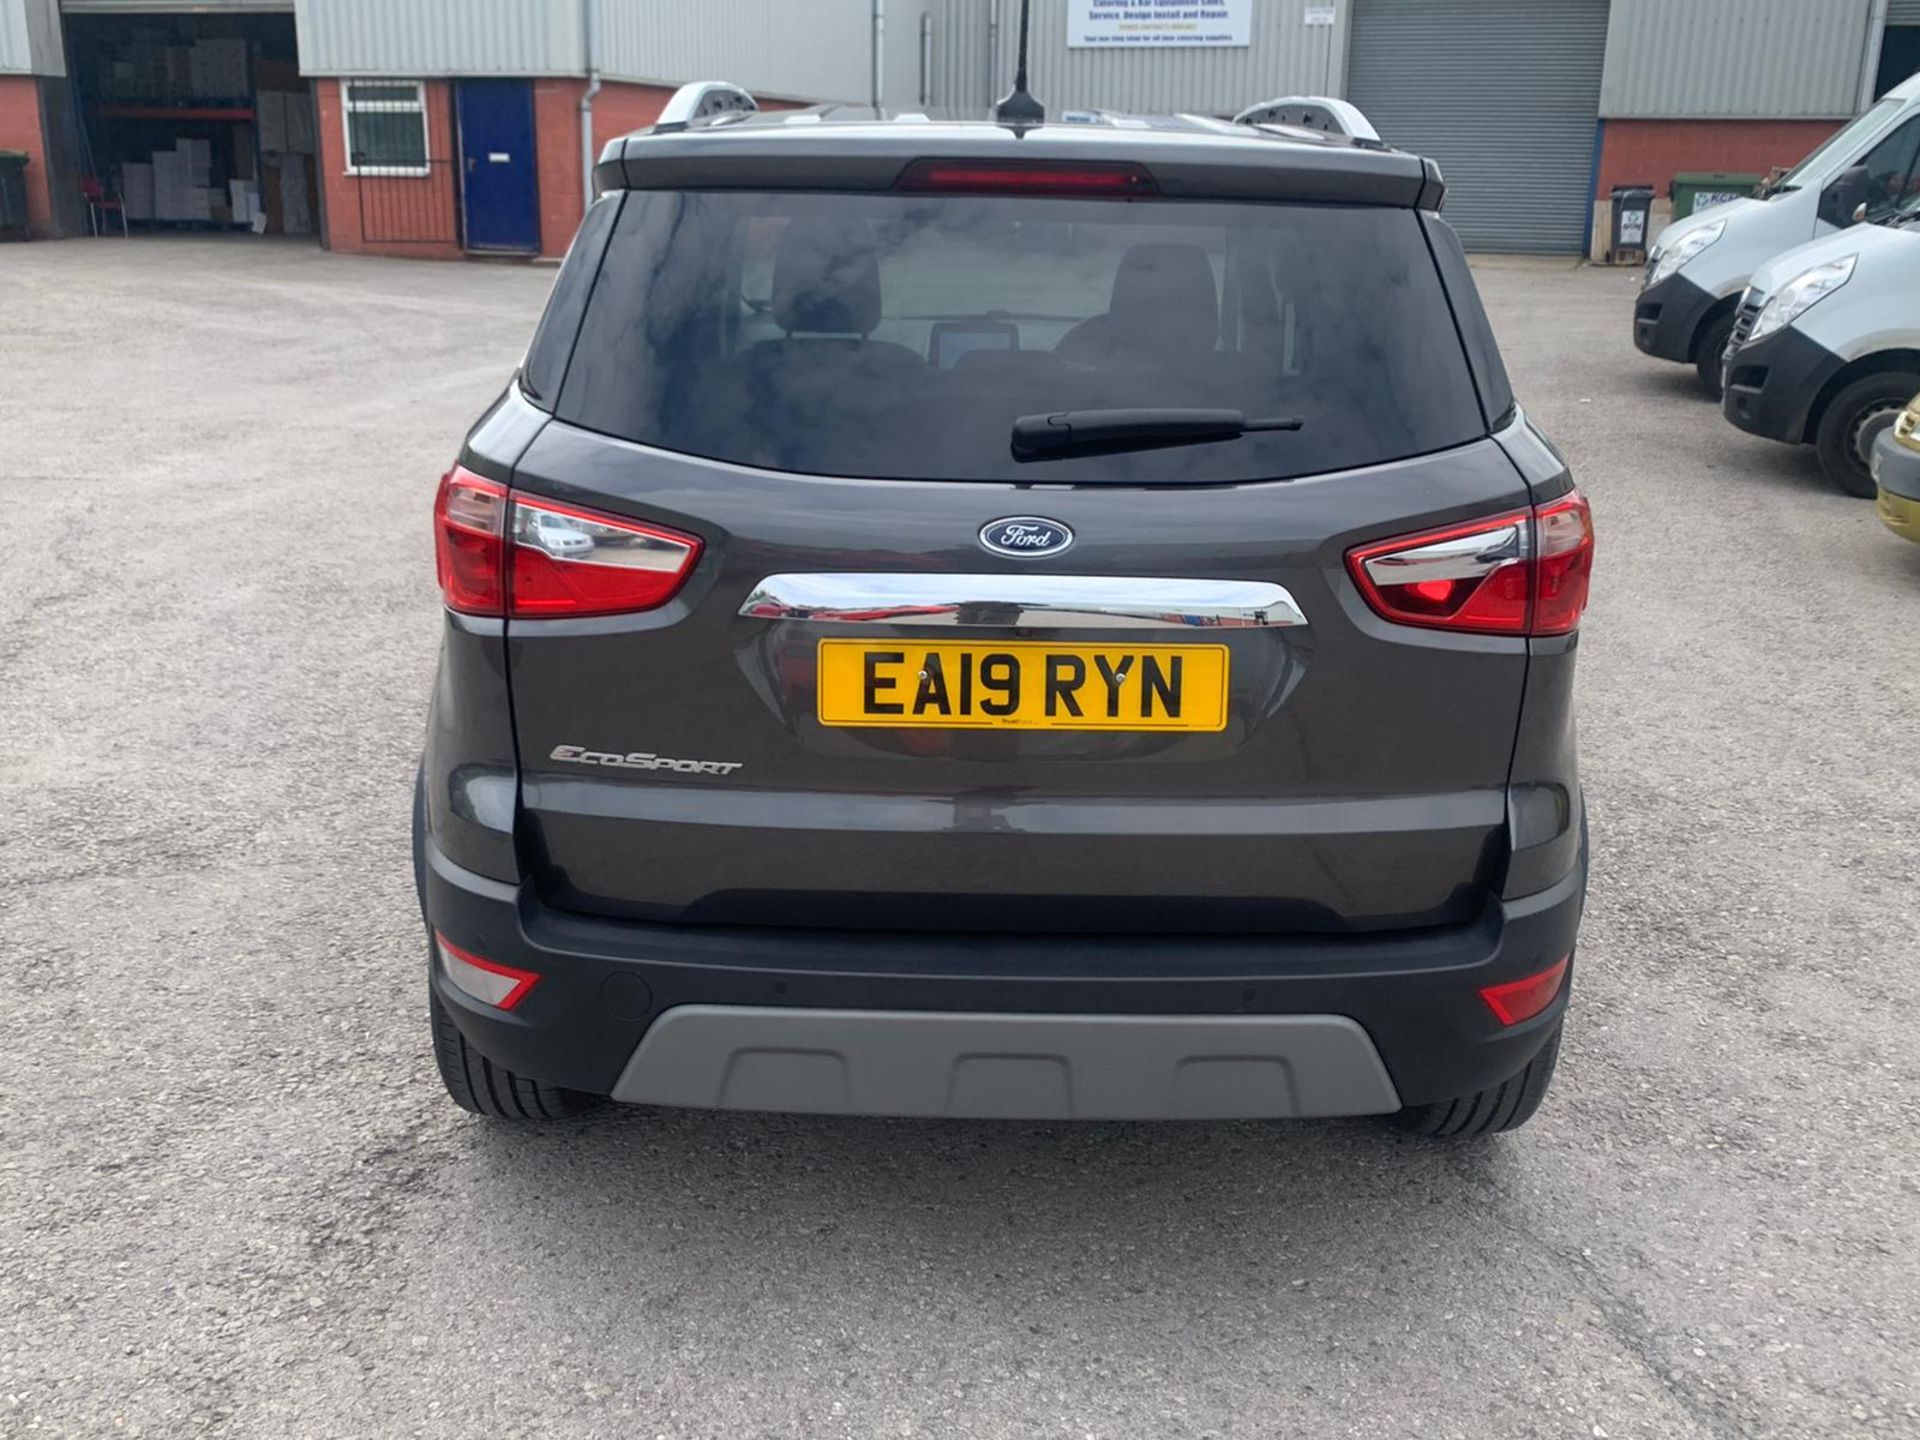 2019/19 REG FORD ECOSPORT TITANIUM 998CC PETROL 125BHP 5DR, SHOWING 0 FORMER KEEPERS *NO VAT* - Image 5 of 14